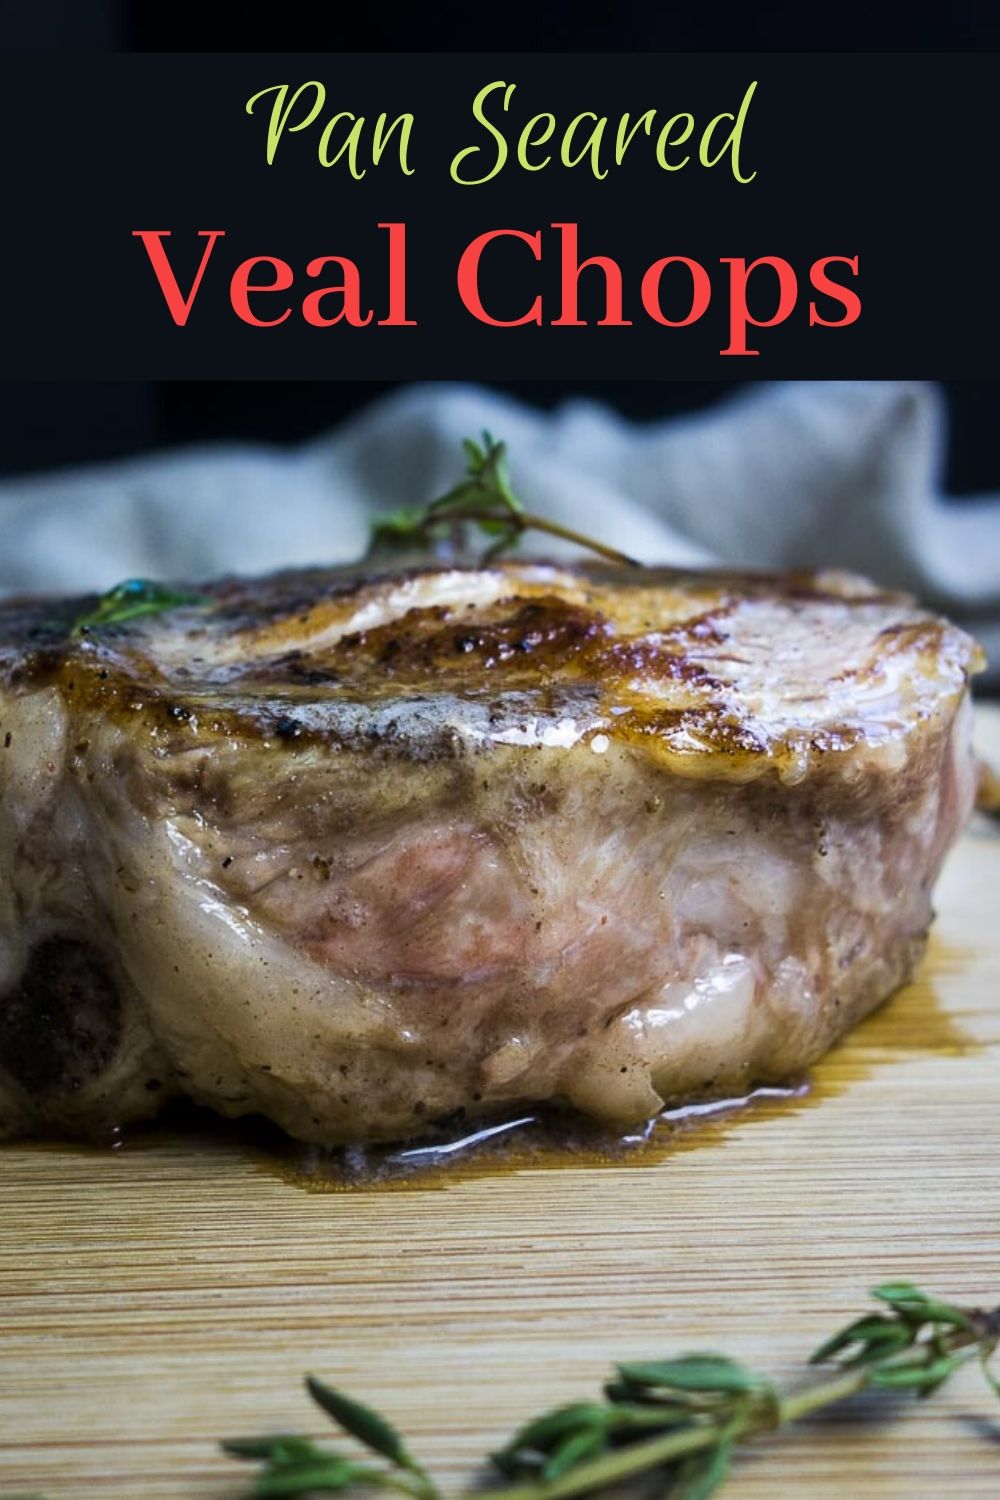 Pan Seared Veal Chops with Truffle Butter